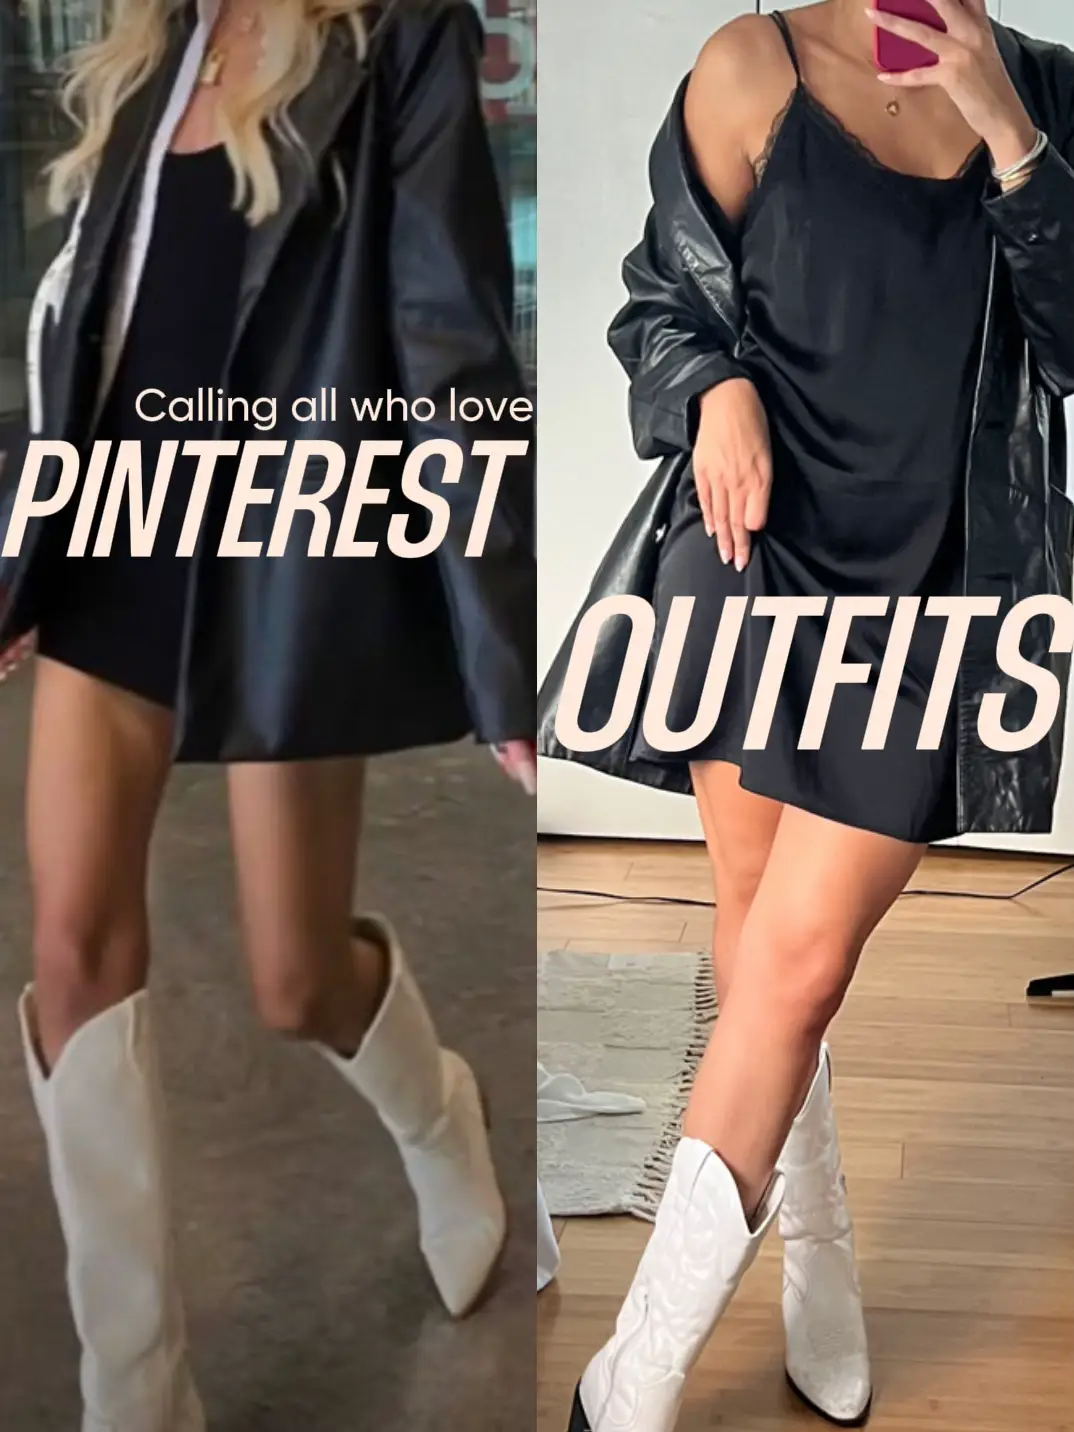 recreating aesthetic pinterest outfits w/ my old clothes 🤎☁️ 